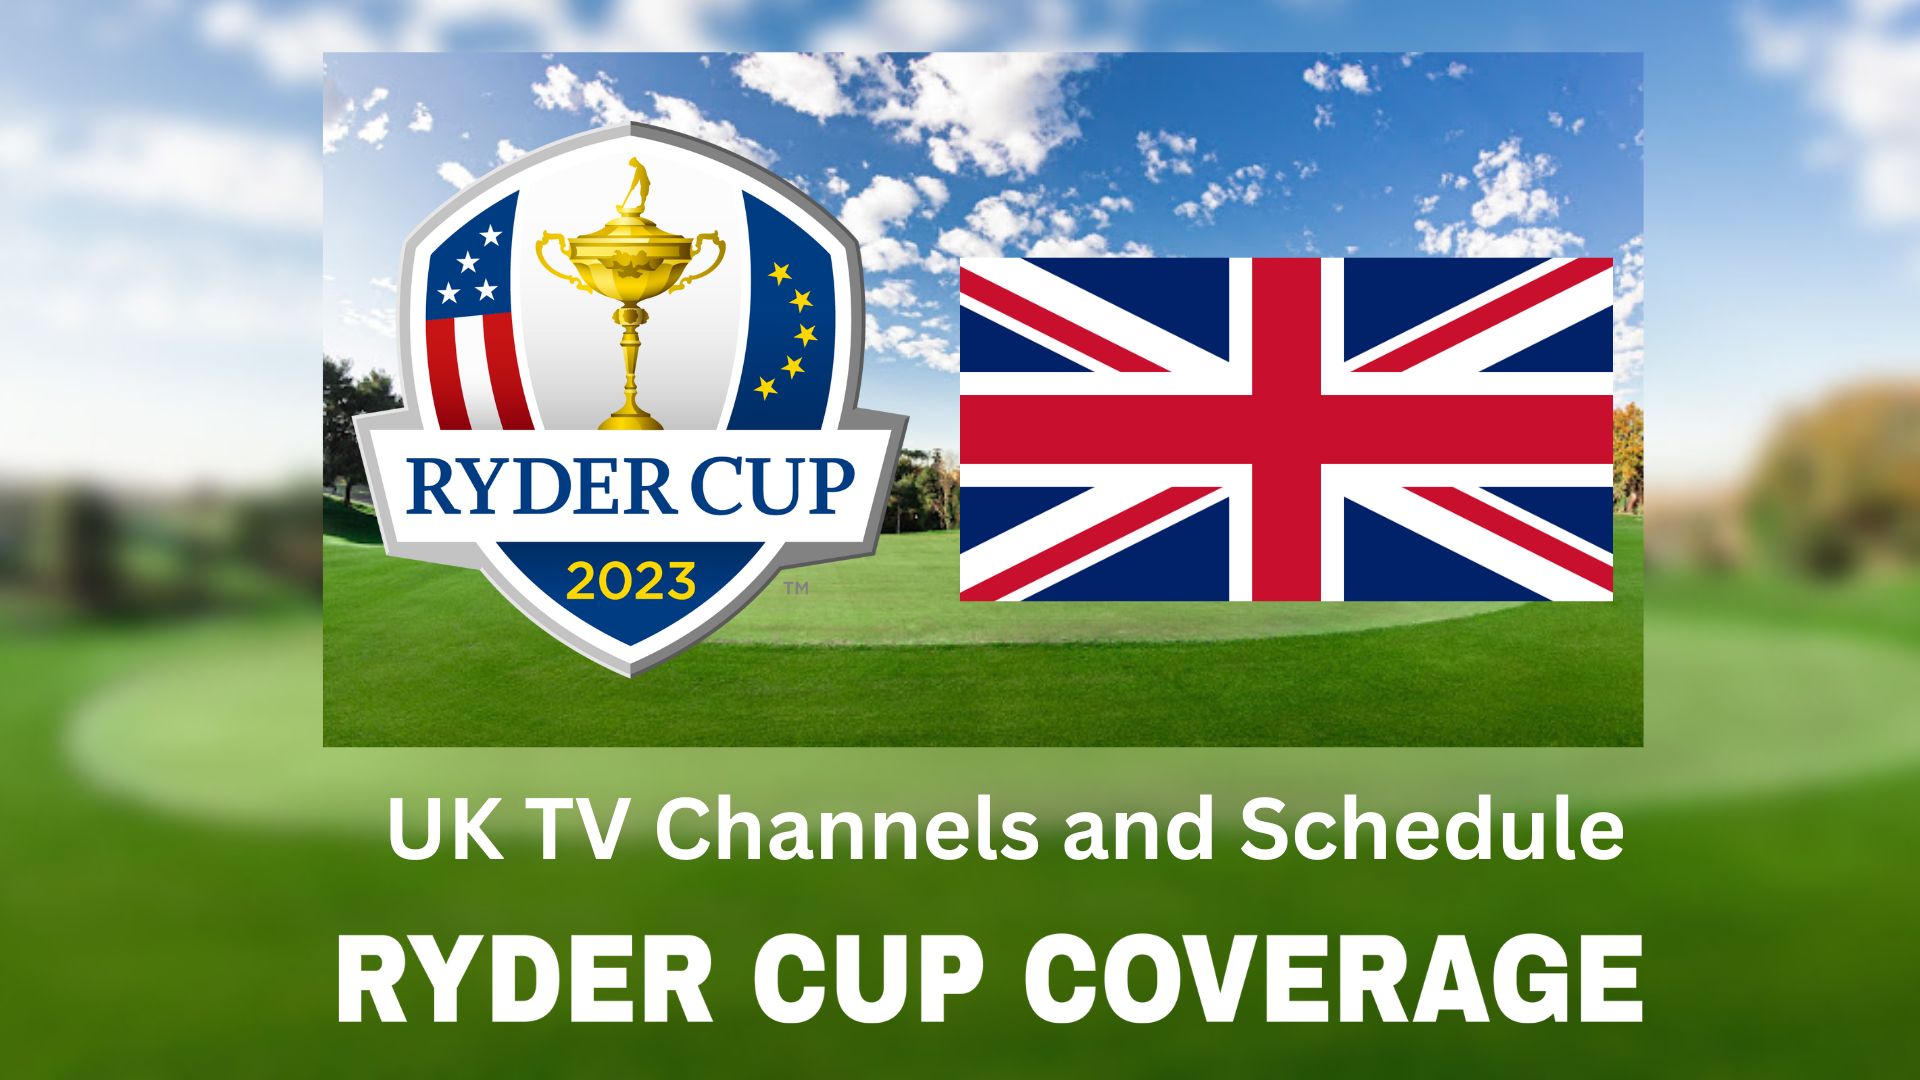 Ryder Cup UK TV Schedule and Channels